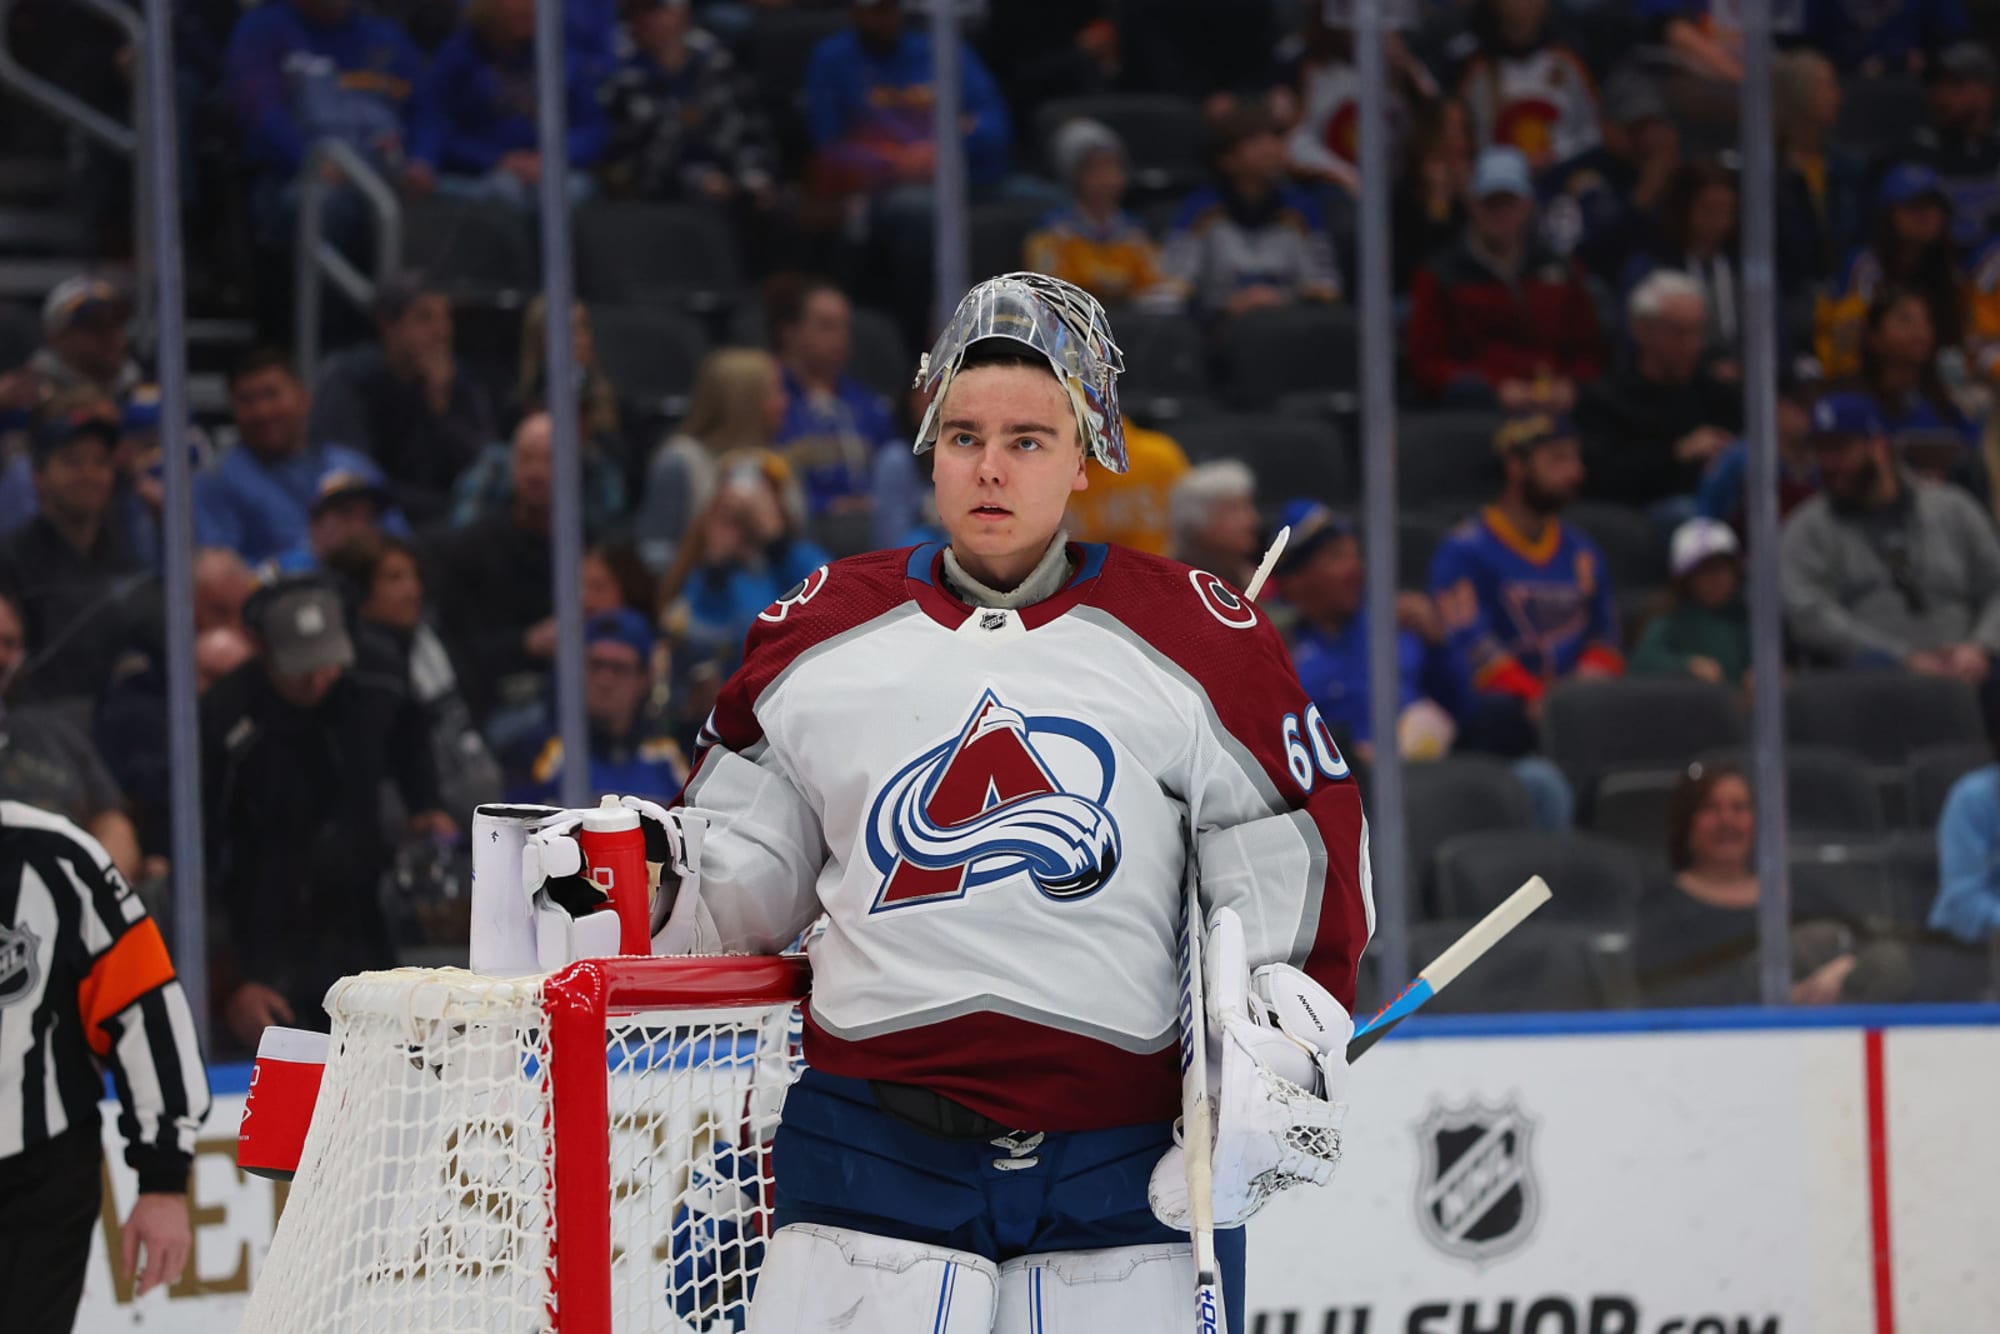 Game Preview #60: New Jersey Devils at Colorado Avalanche - All